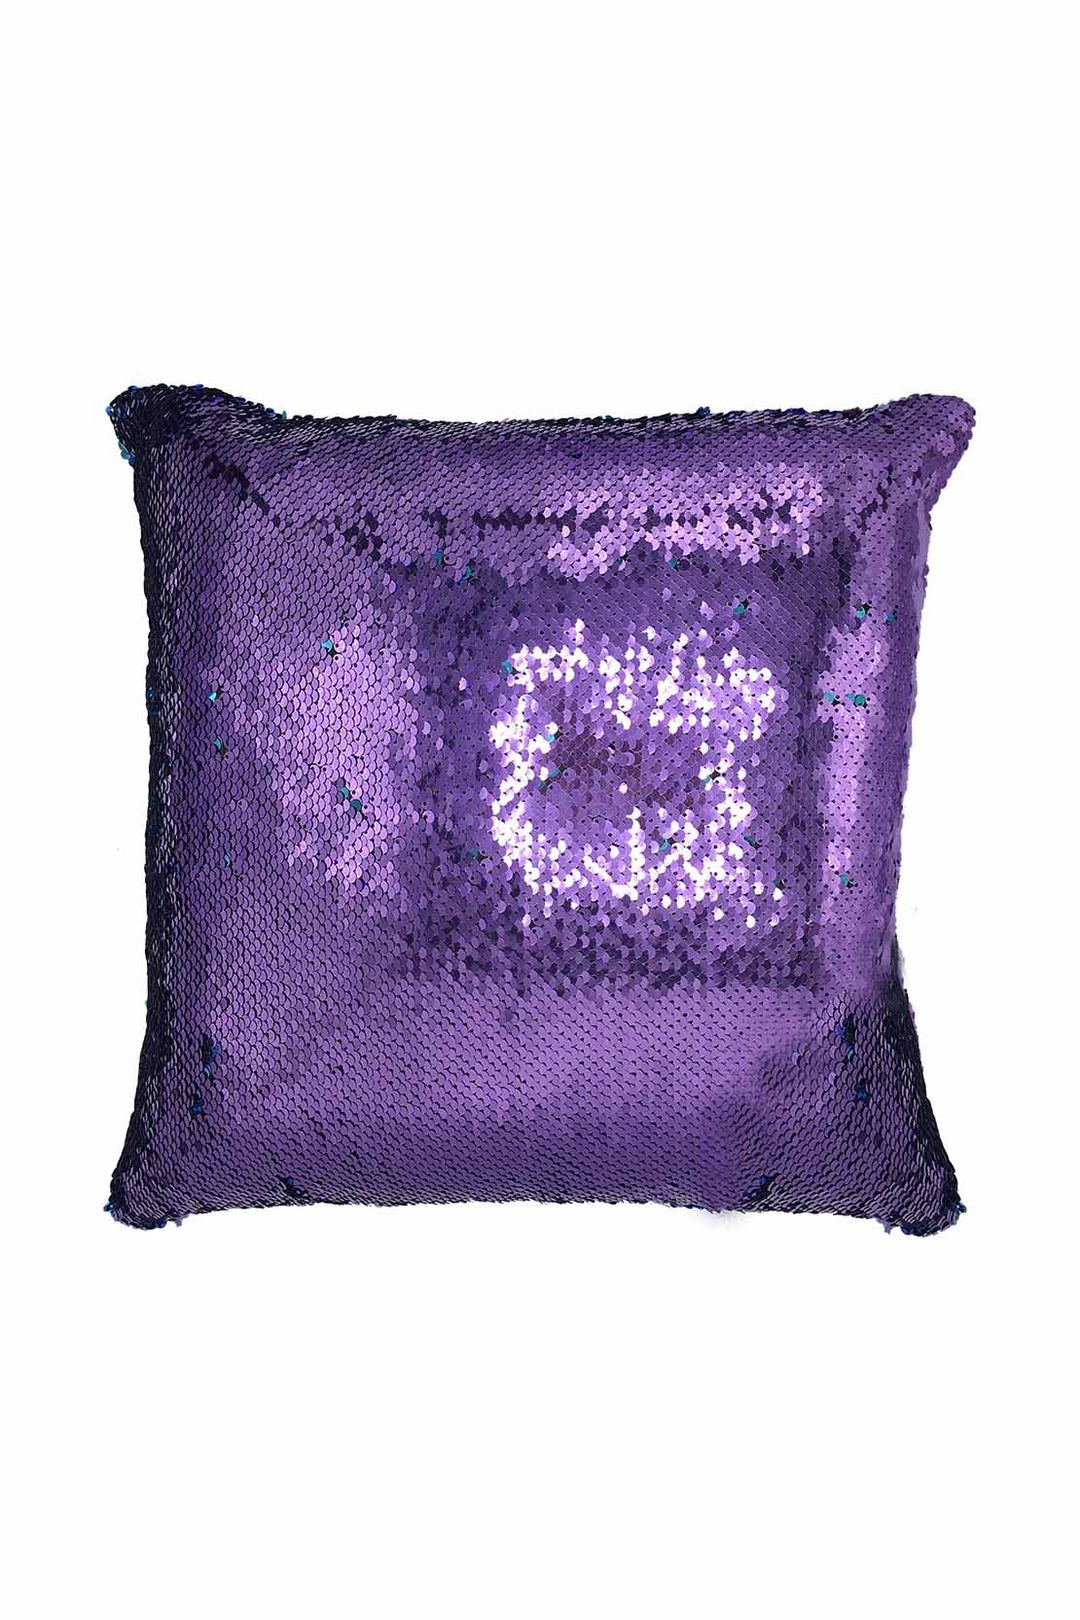 Glitter Cushion Cover Without Filling Teal and Purple - V Surfaces